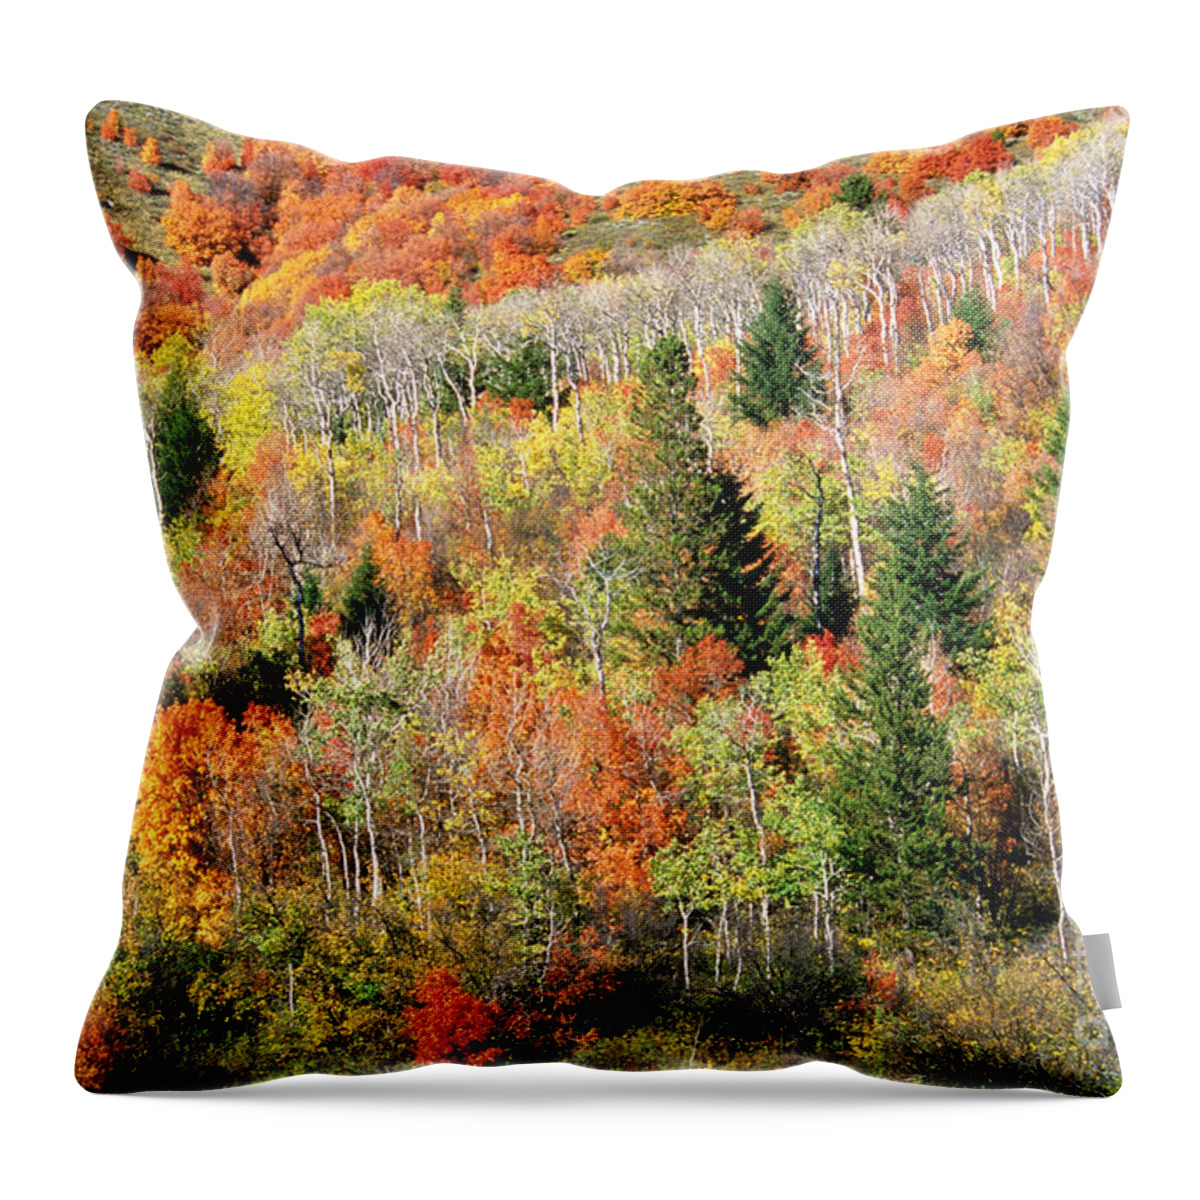 Fall Color Throw Pillow featuring the photograph Fall Foliage by William H. Mullins